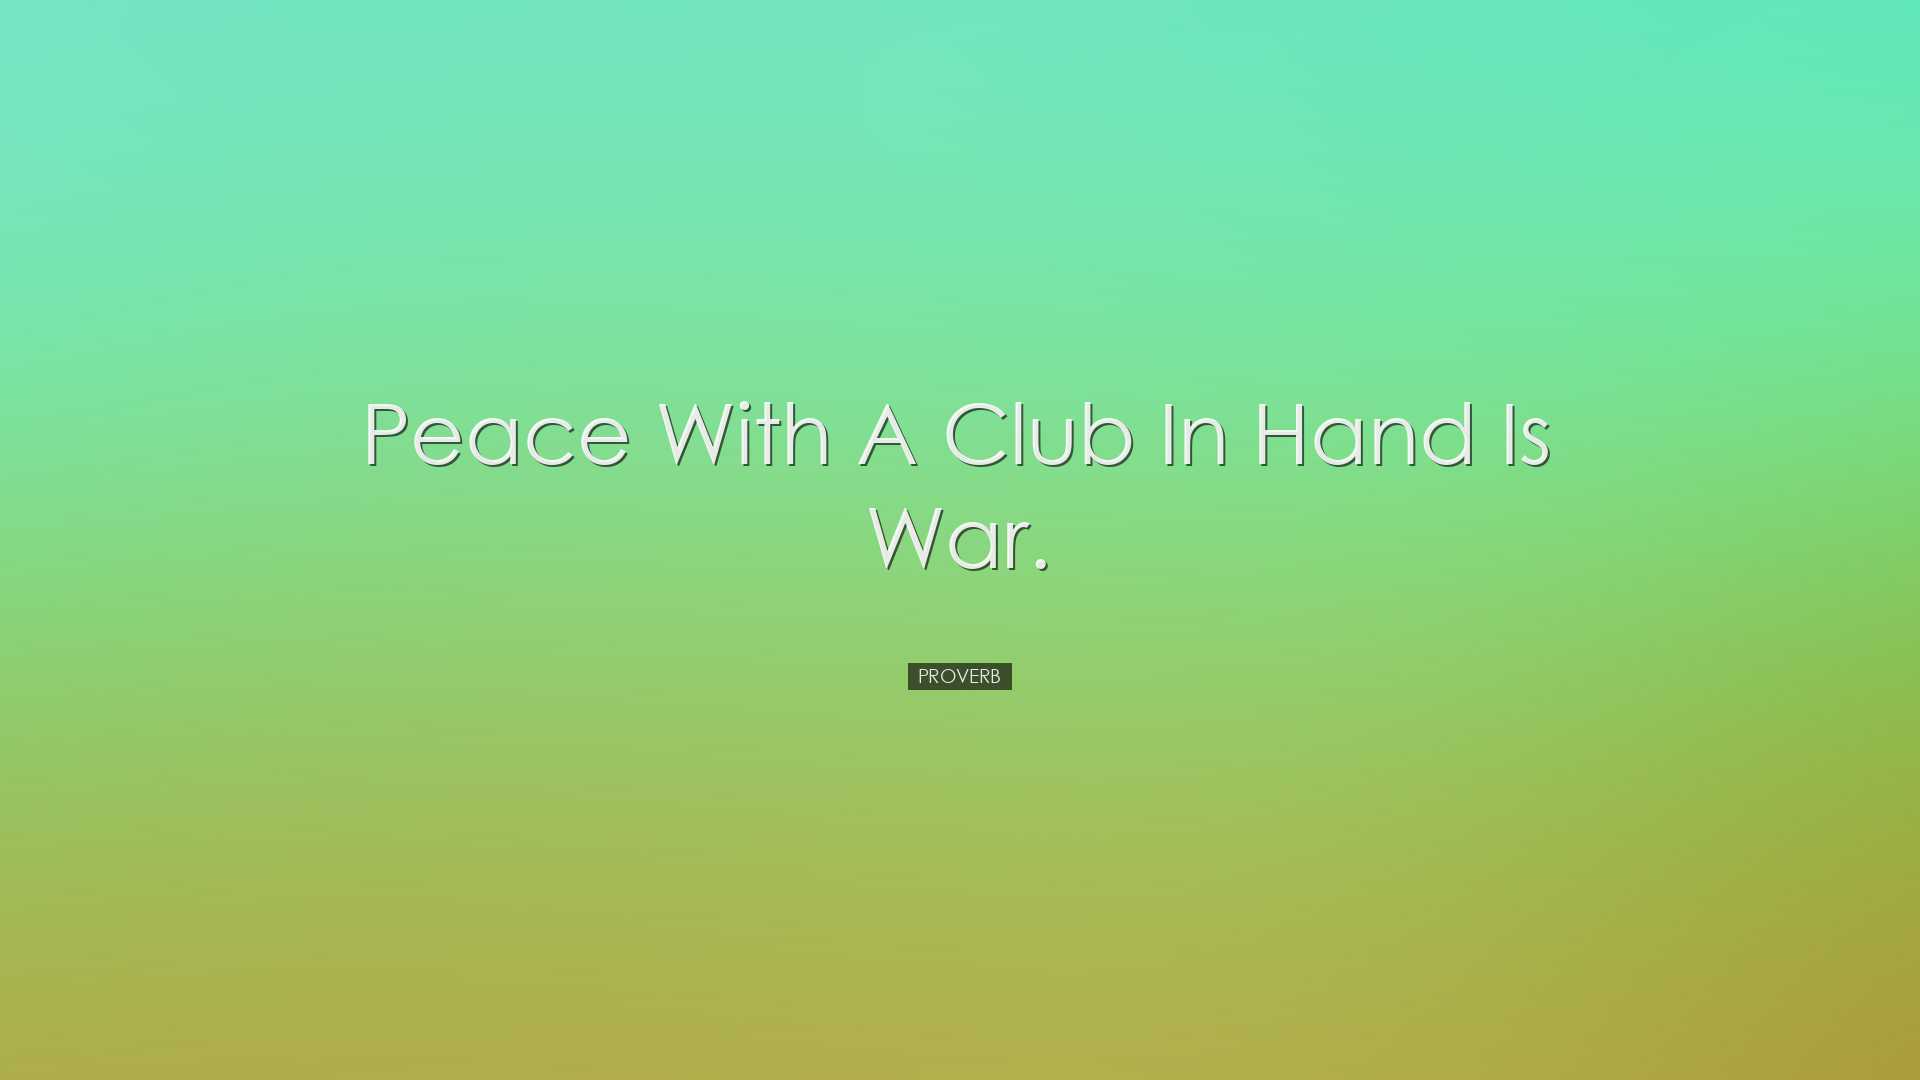 Peace with a club in hand is war. - Proverb